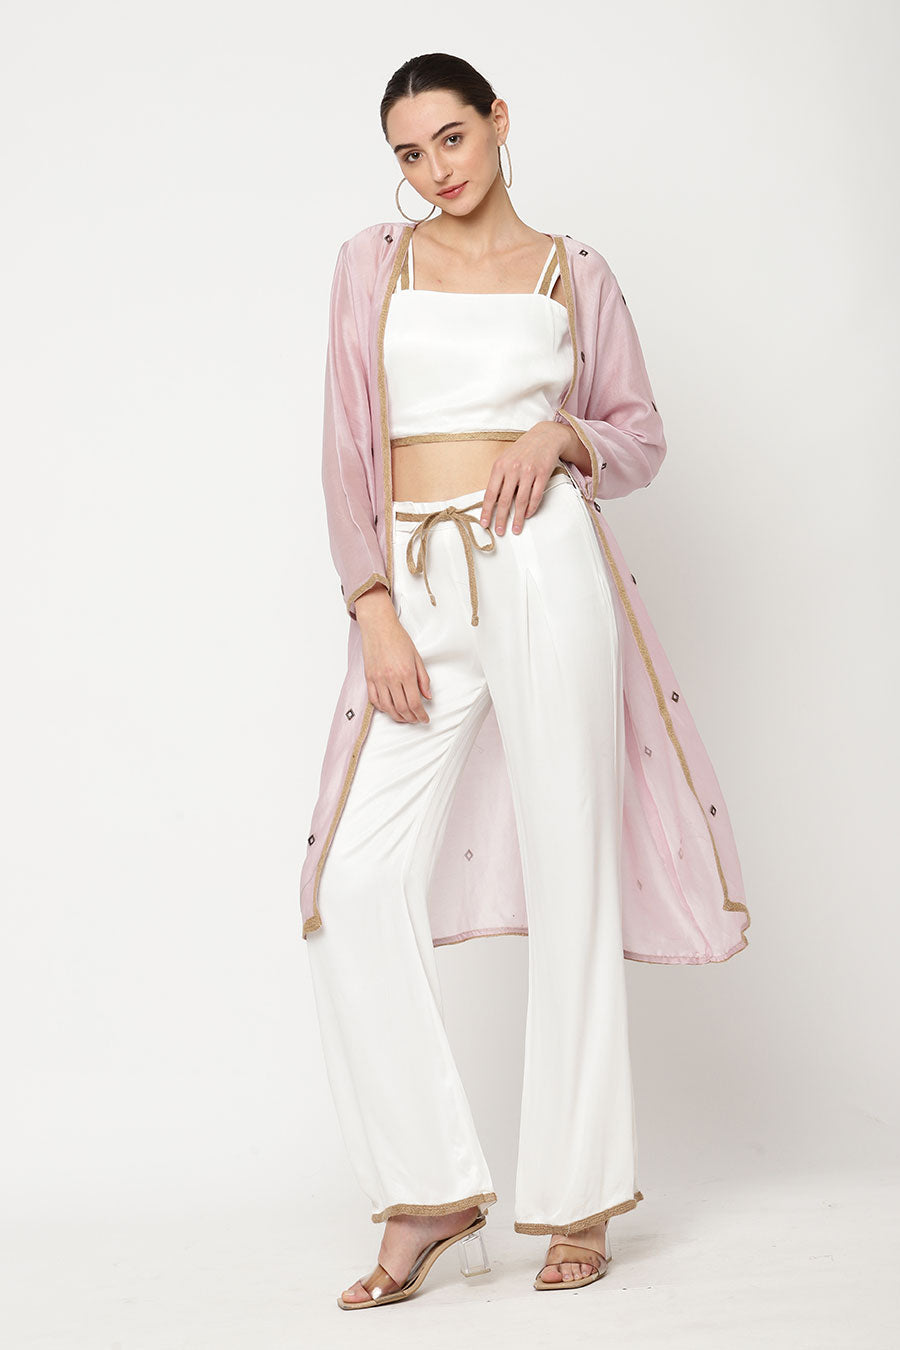 Ivory Top & Pant With Pink Embroidered Shrug Co-Ord Set